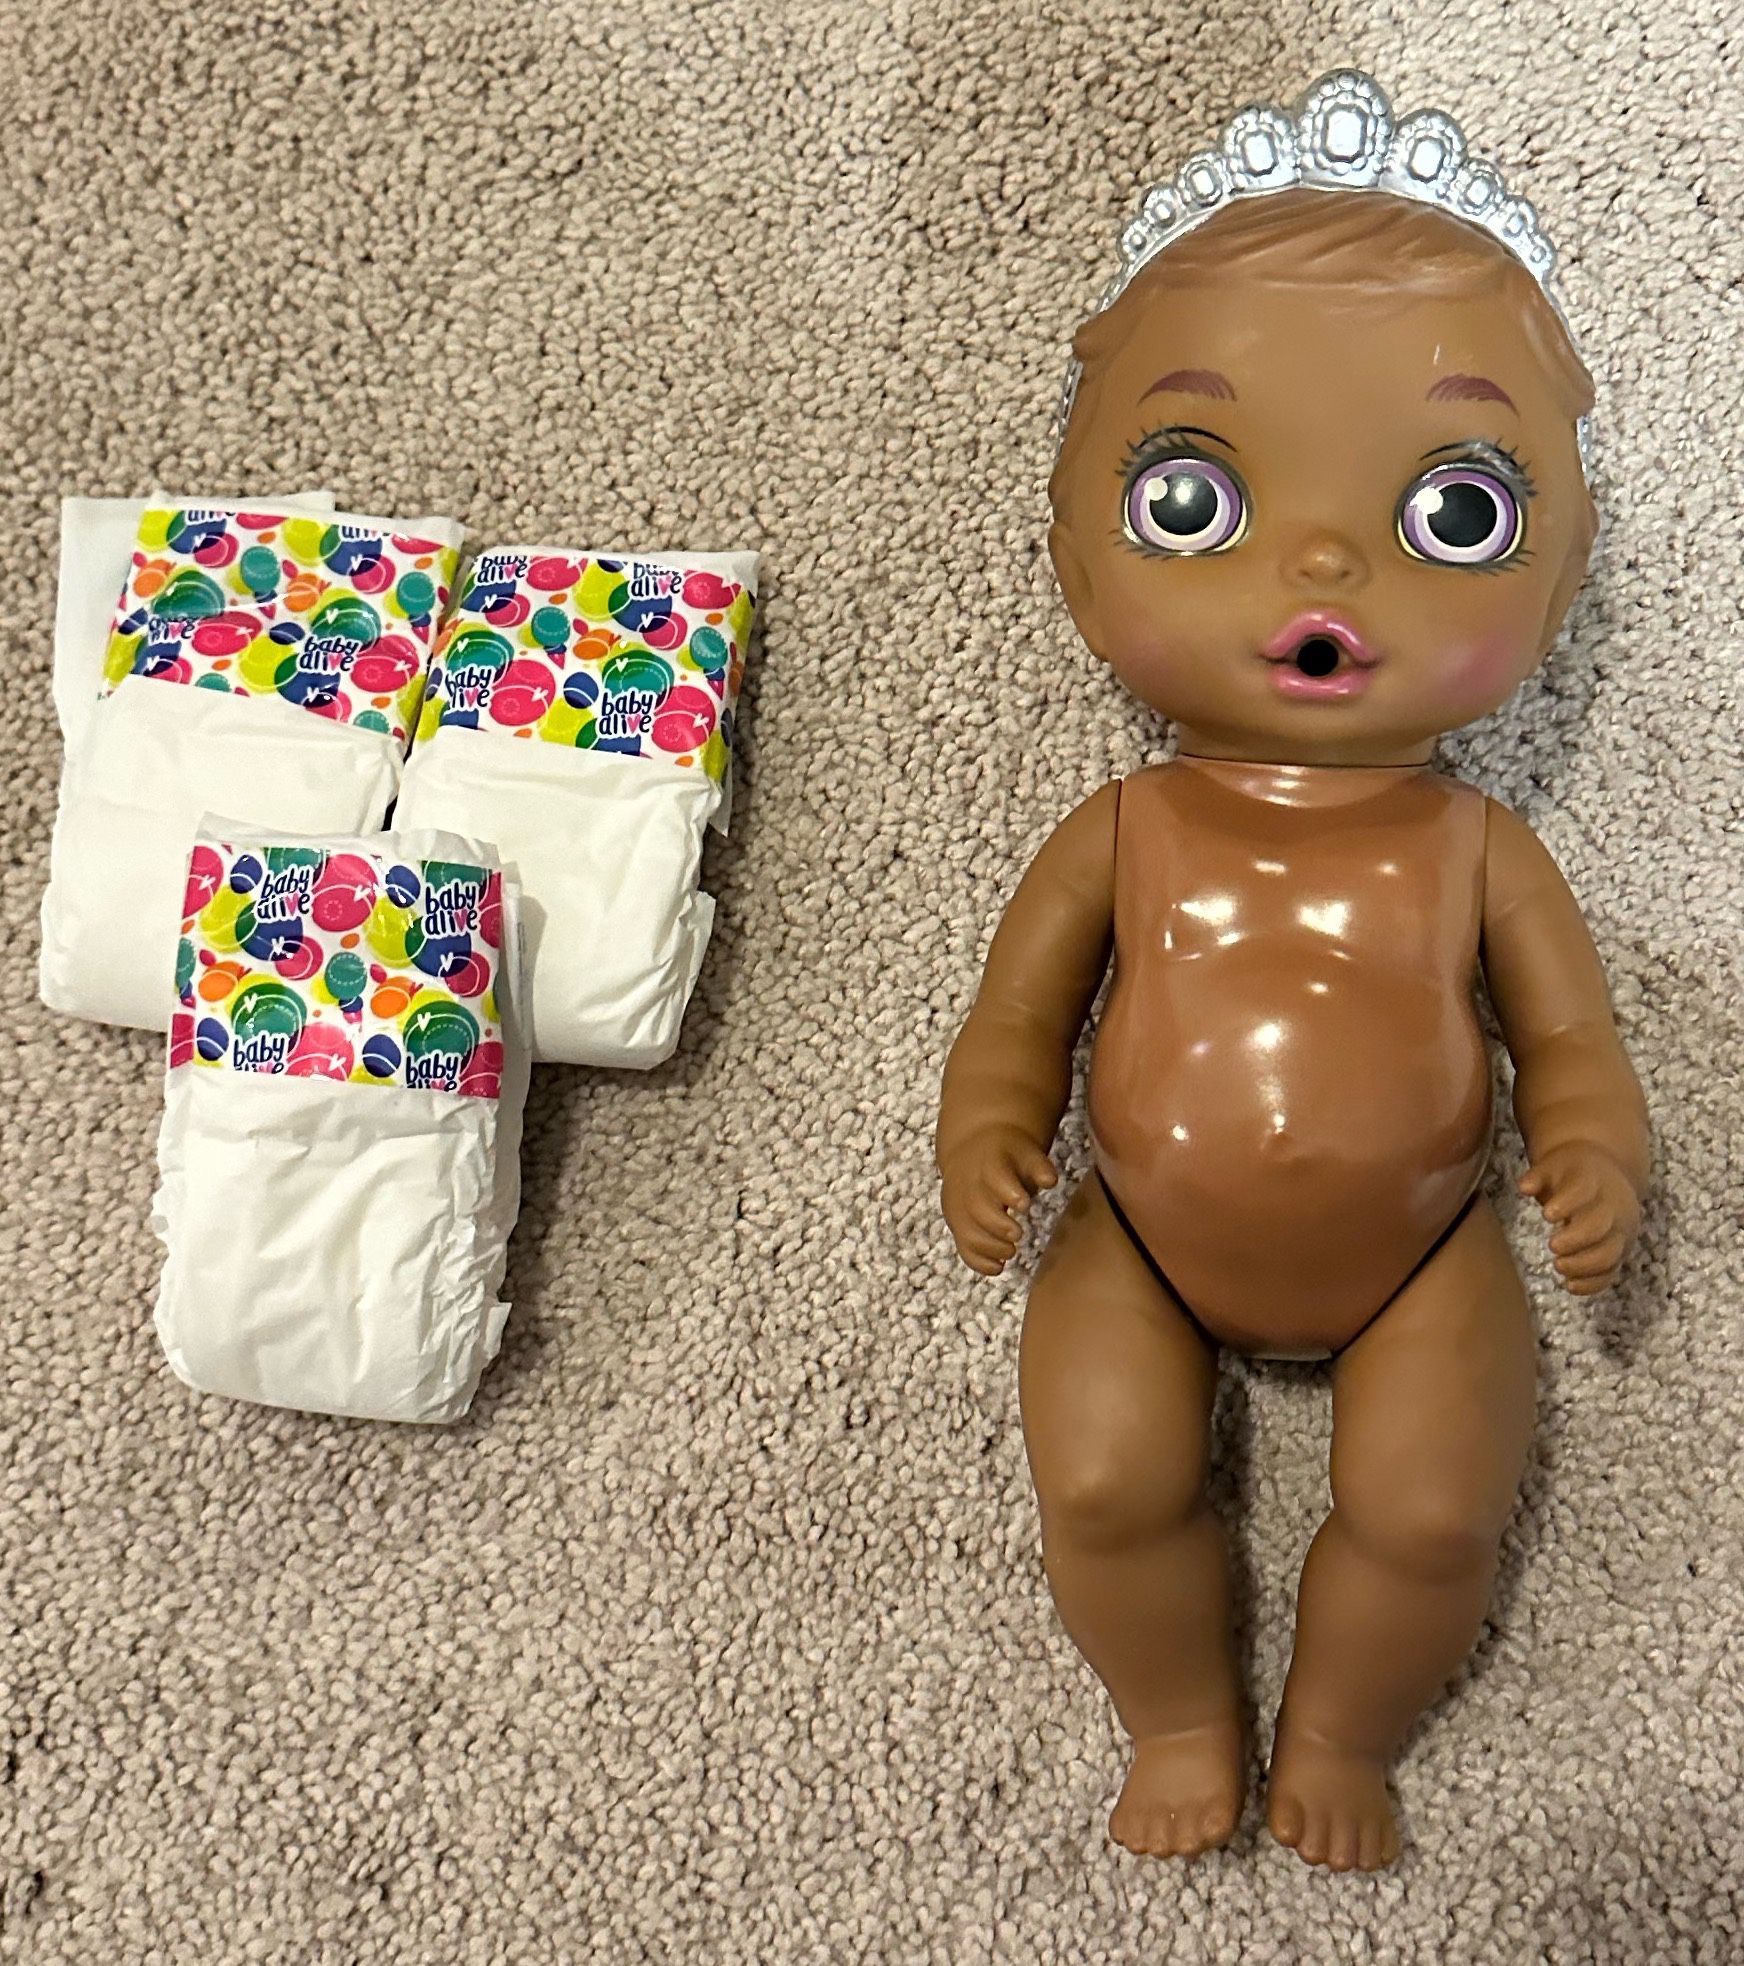 Baby Alive doll W/ 3 diapers